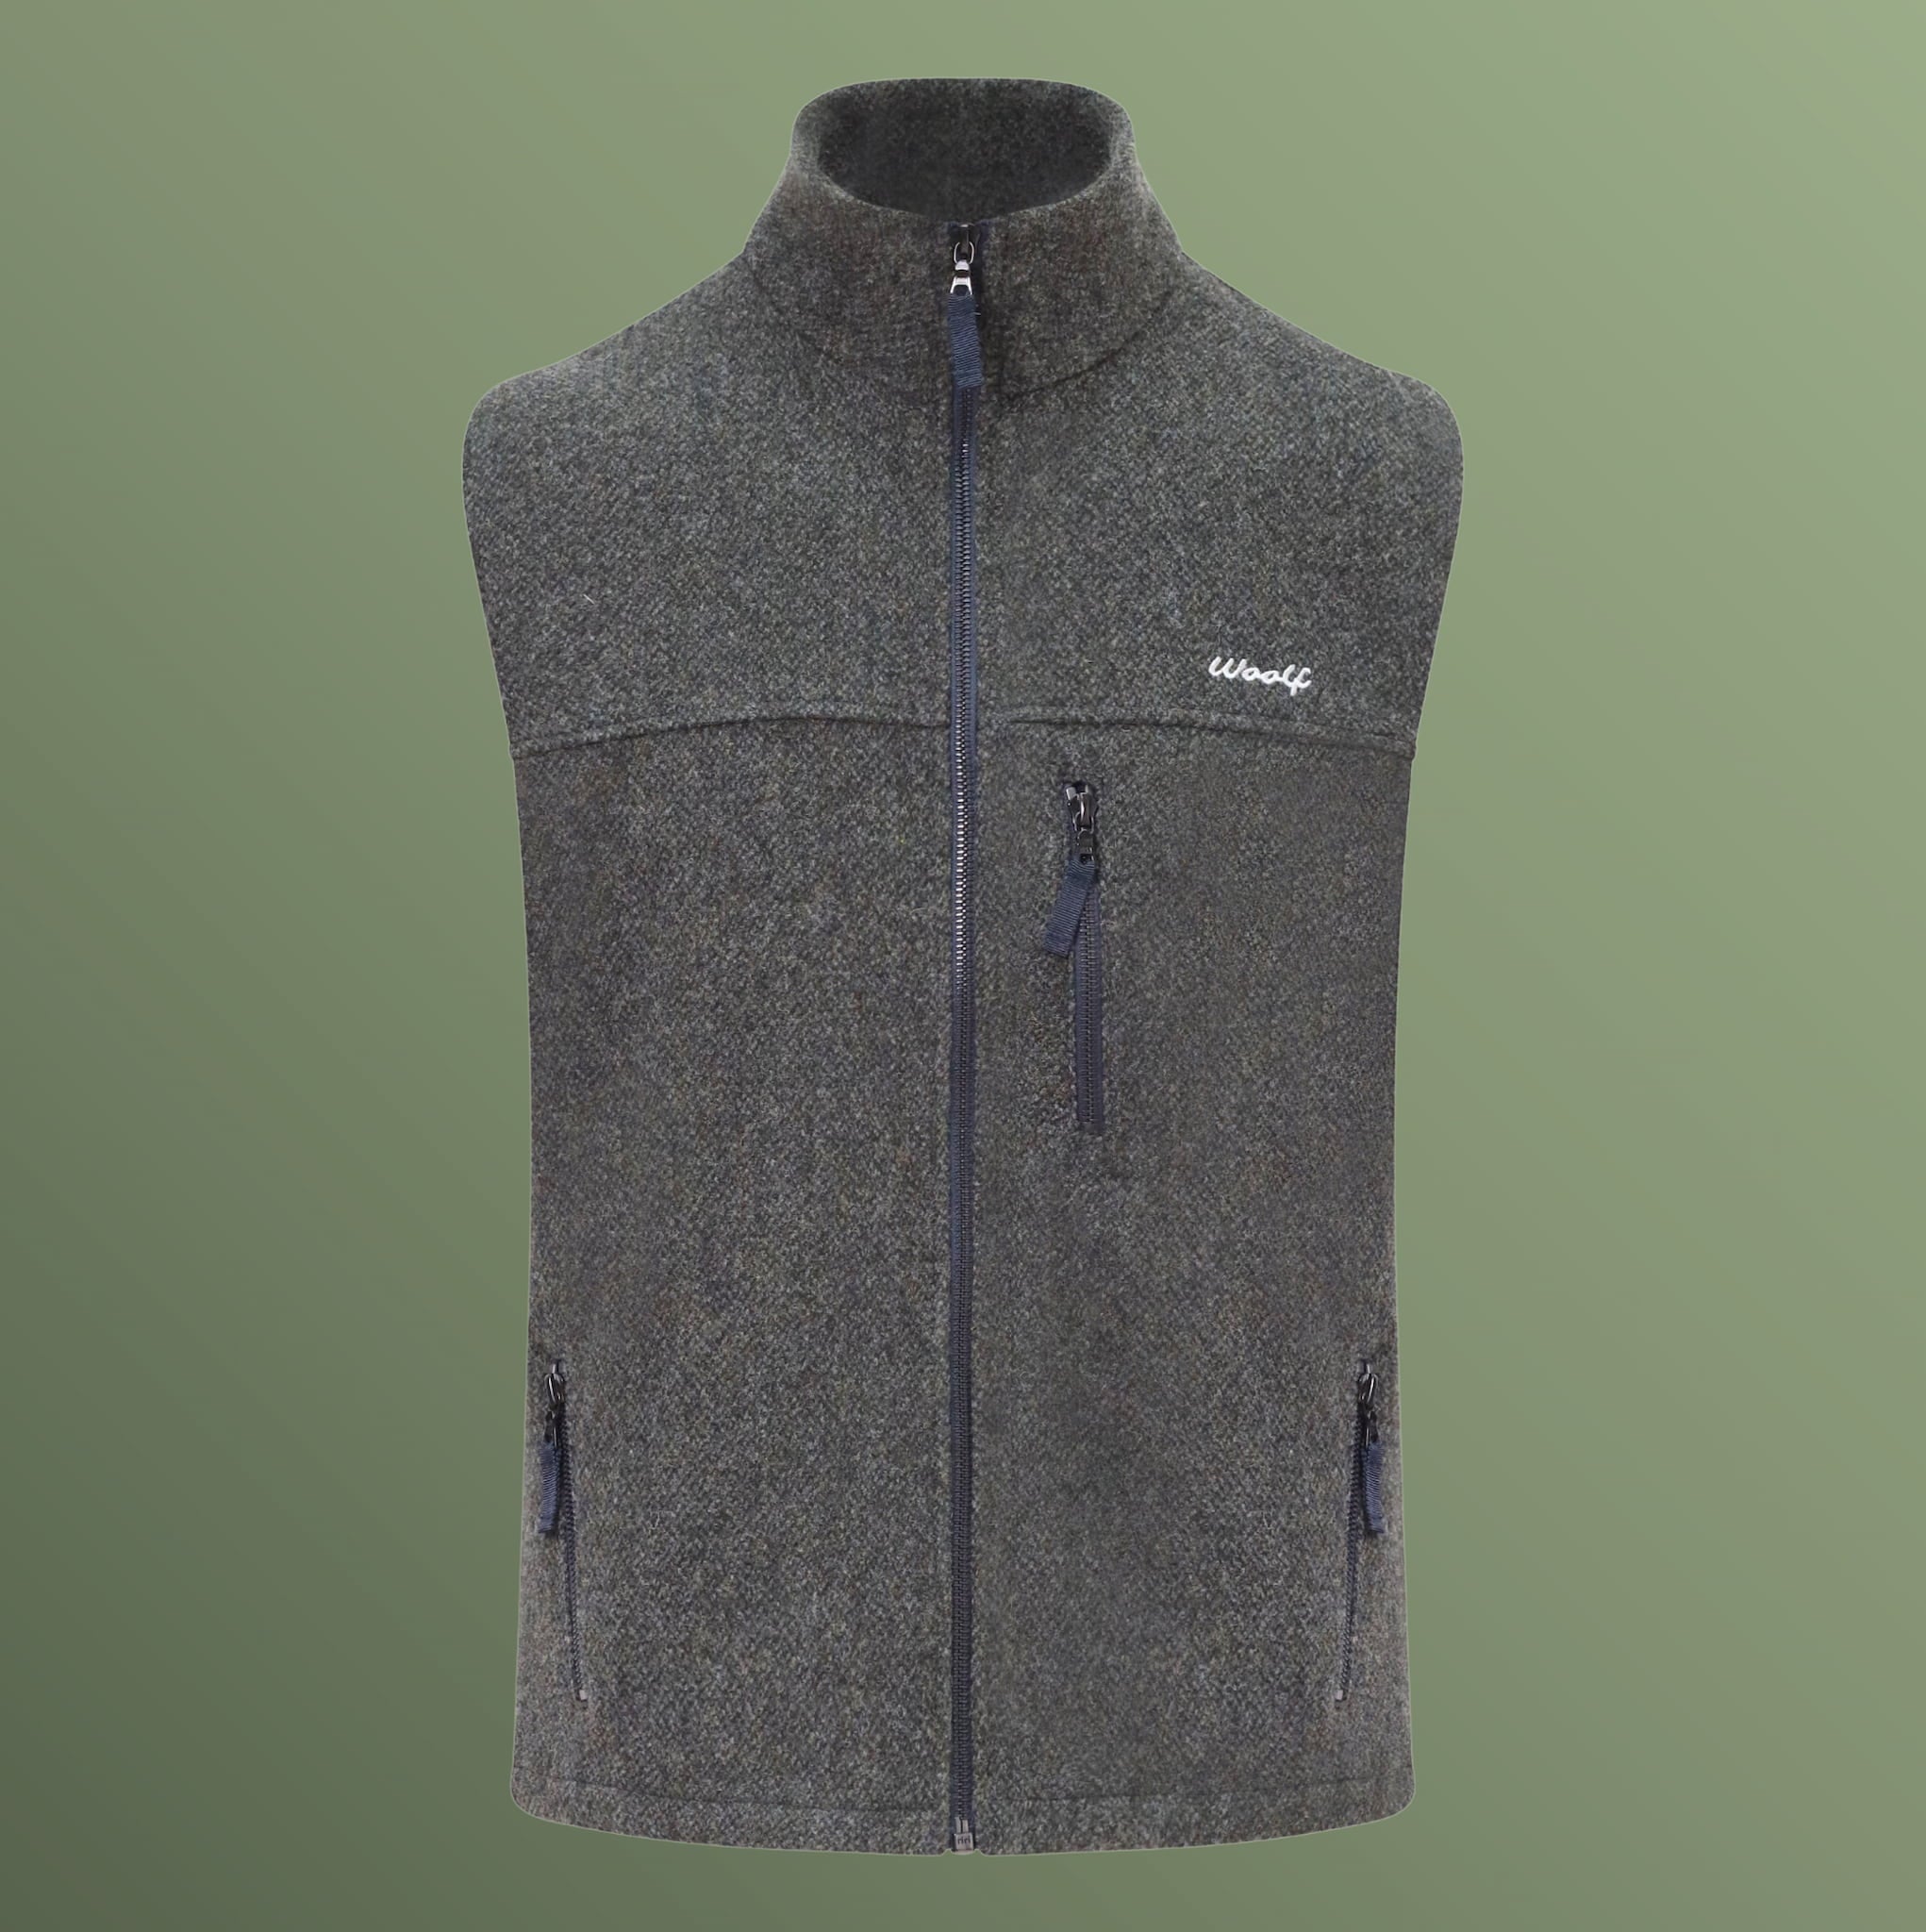 Women's PureFleece 100% Merino Fleece mid layer Gilet Vest . Created with our unique weave for superior performance over knitted merino fleece tops.